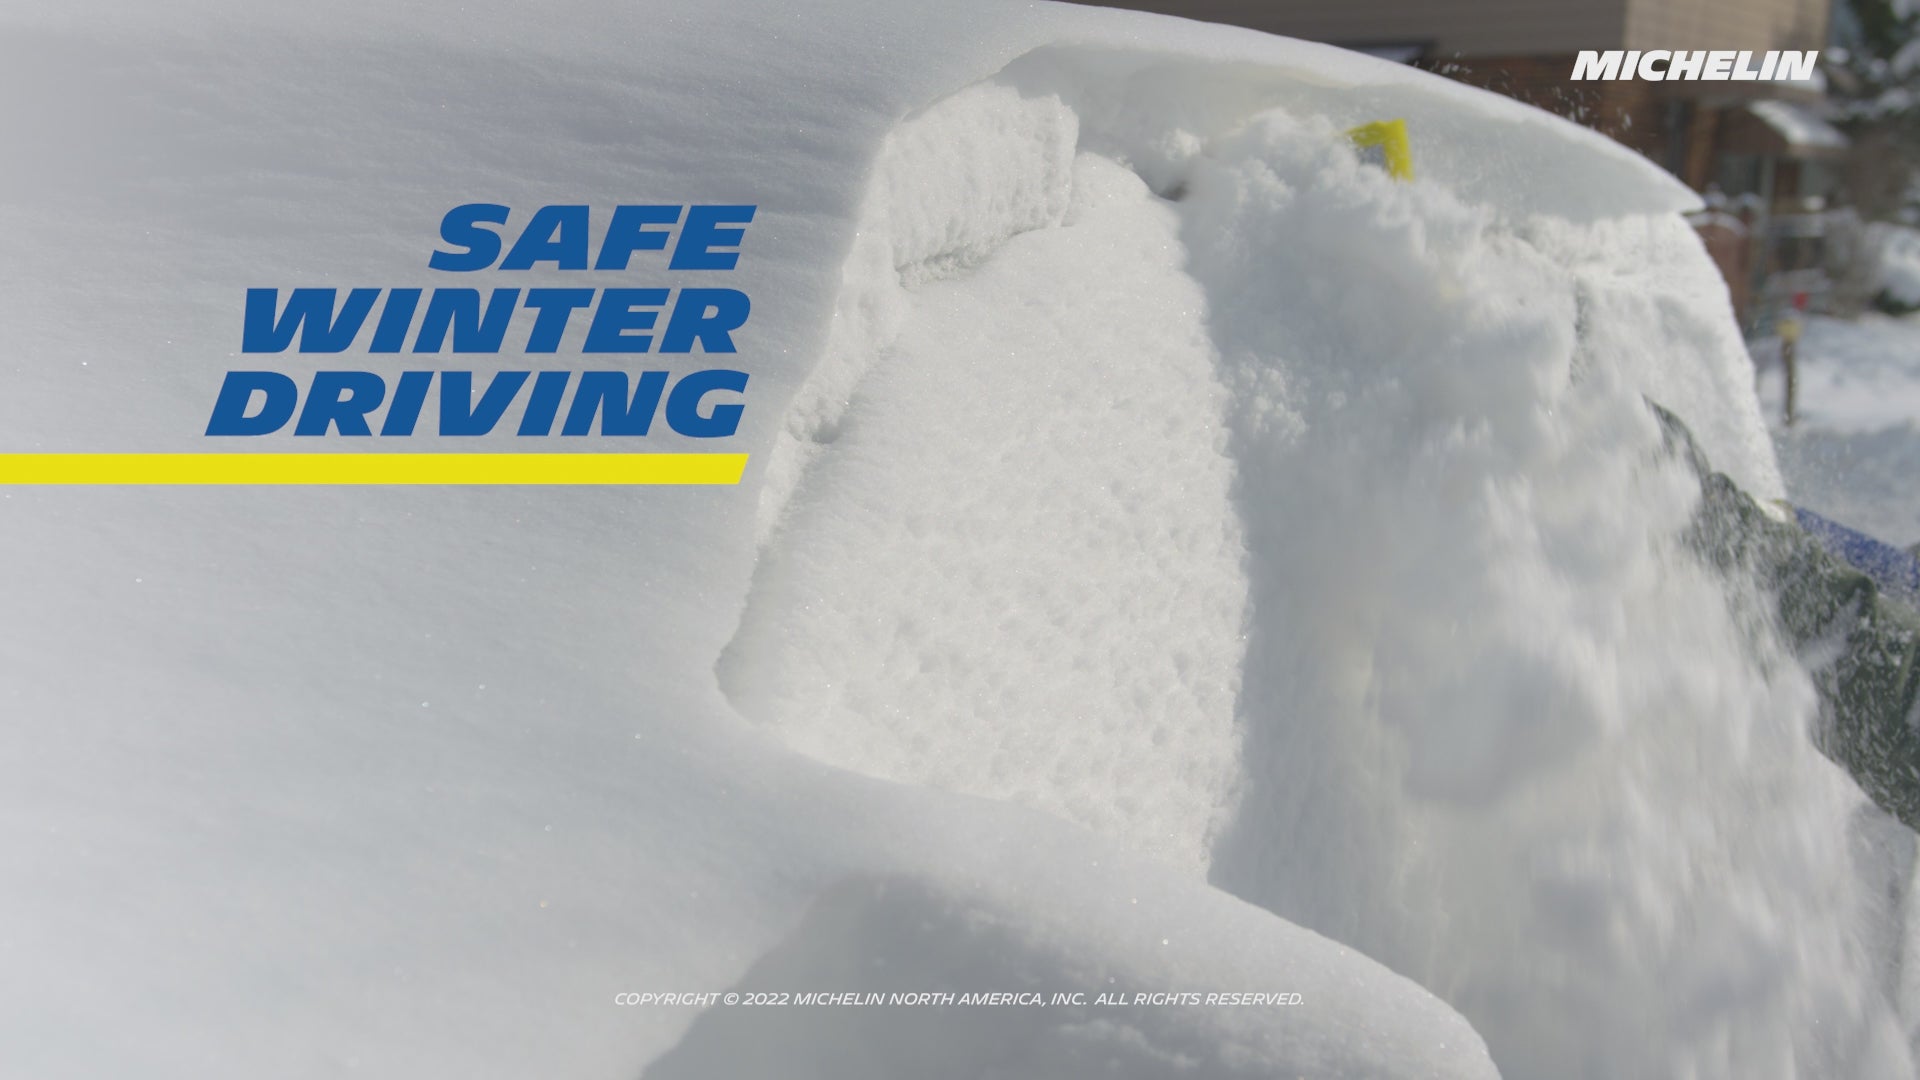 Video shows snow brush being used to clear a thick layer of snow off a red SUV. Text overlay reads, "Safe winter driving begins with visibility"